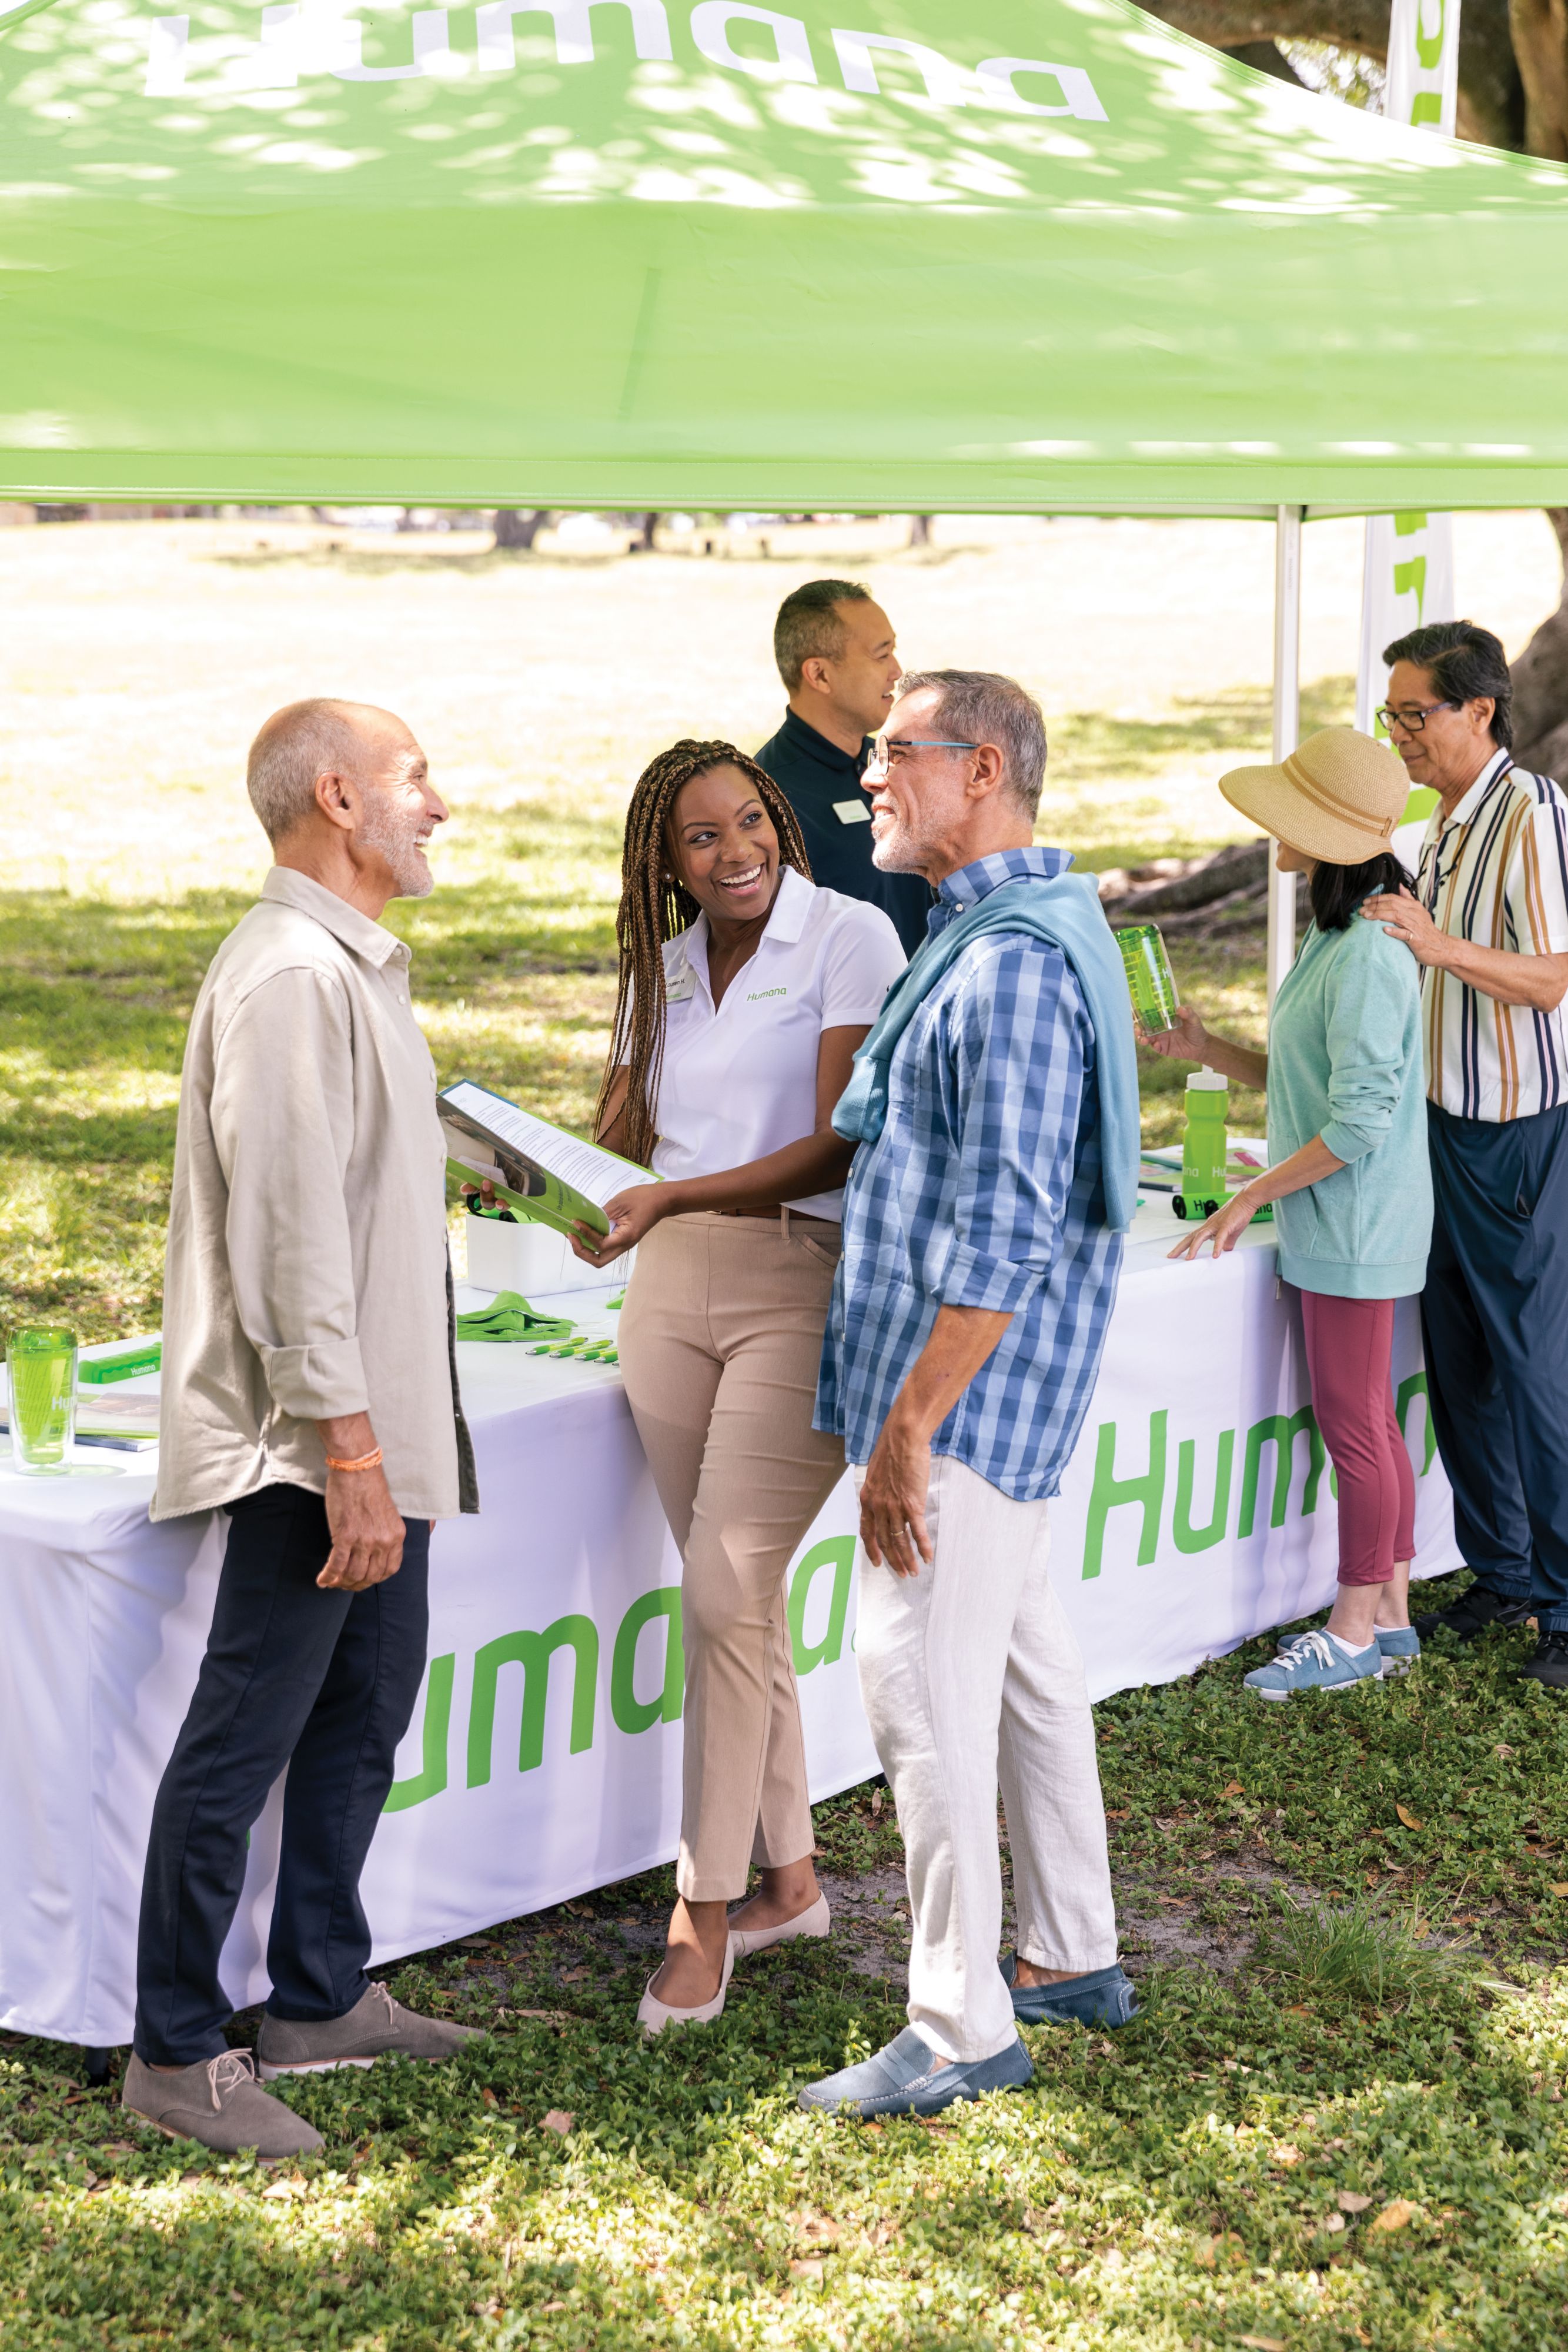 Humana employees at outdoor event